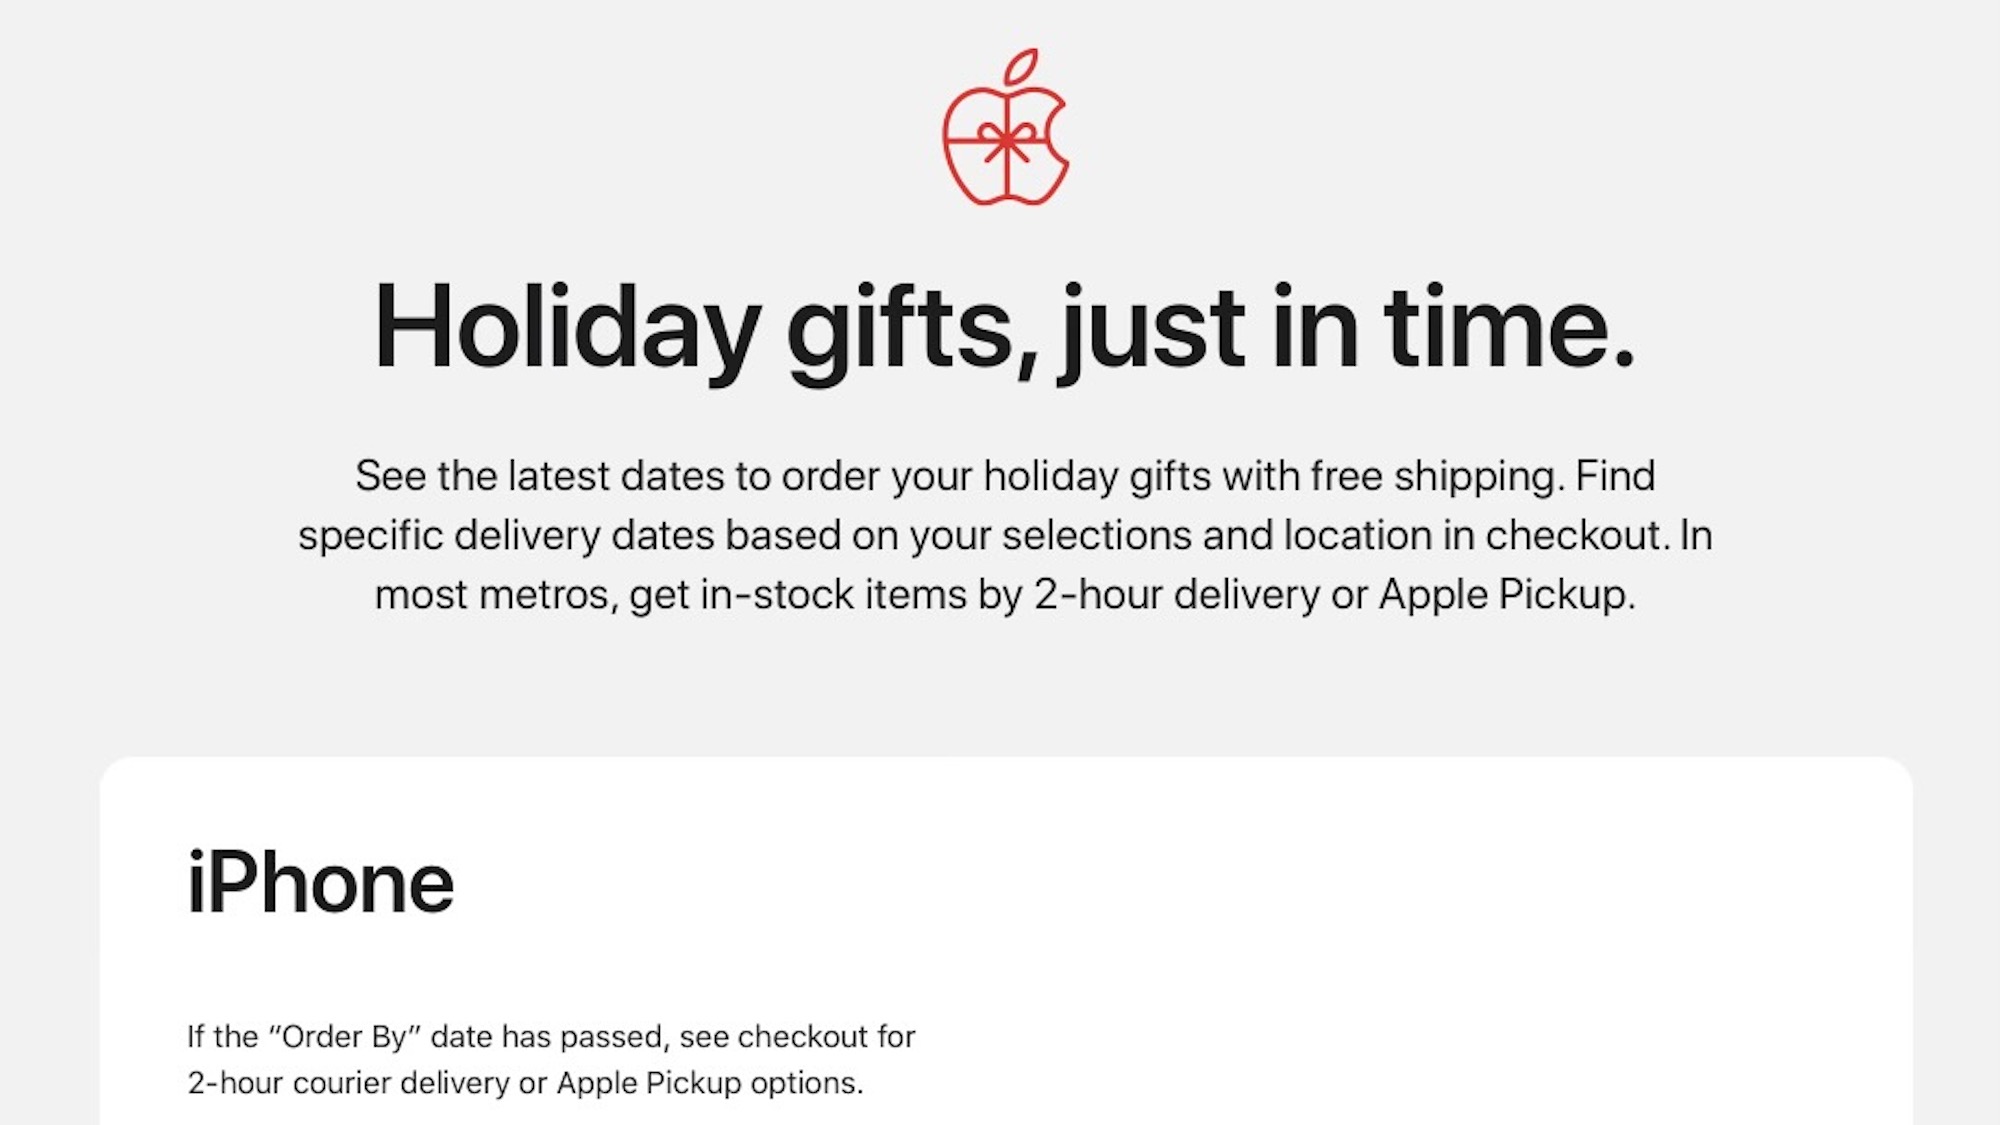 photo of Apple launches new shopping guide with deadlines for ordering in time for the holidays image